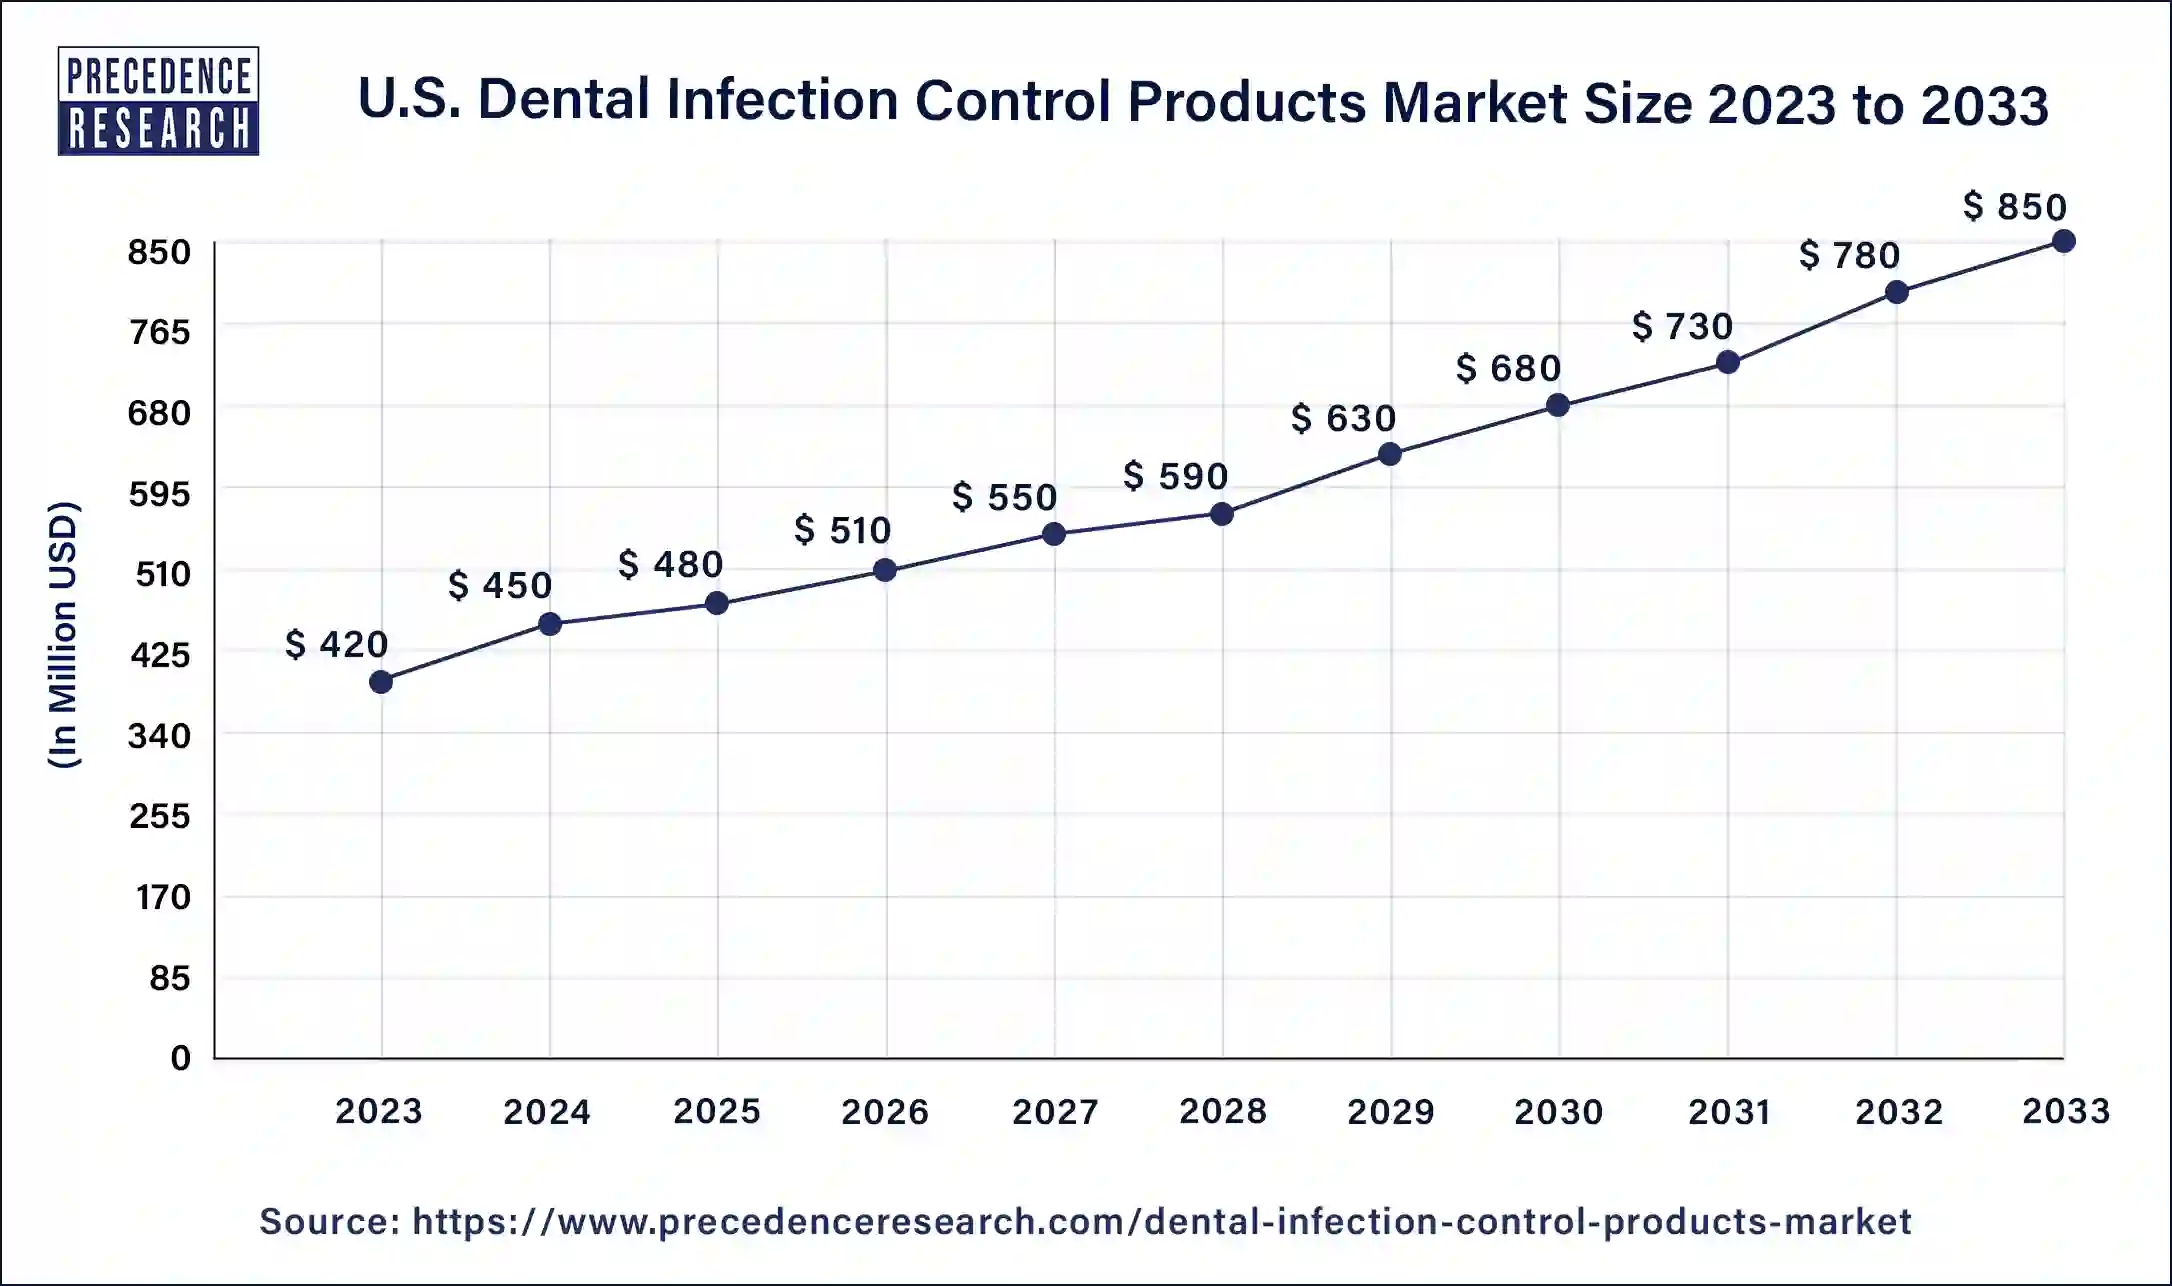 U.S. Dental Infection Control Products Market Size 2024 to 2033